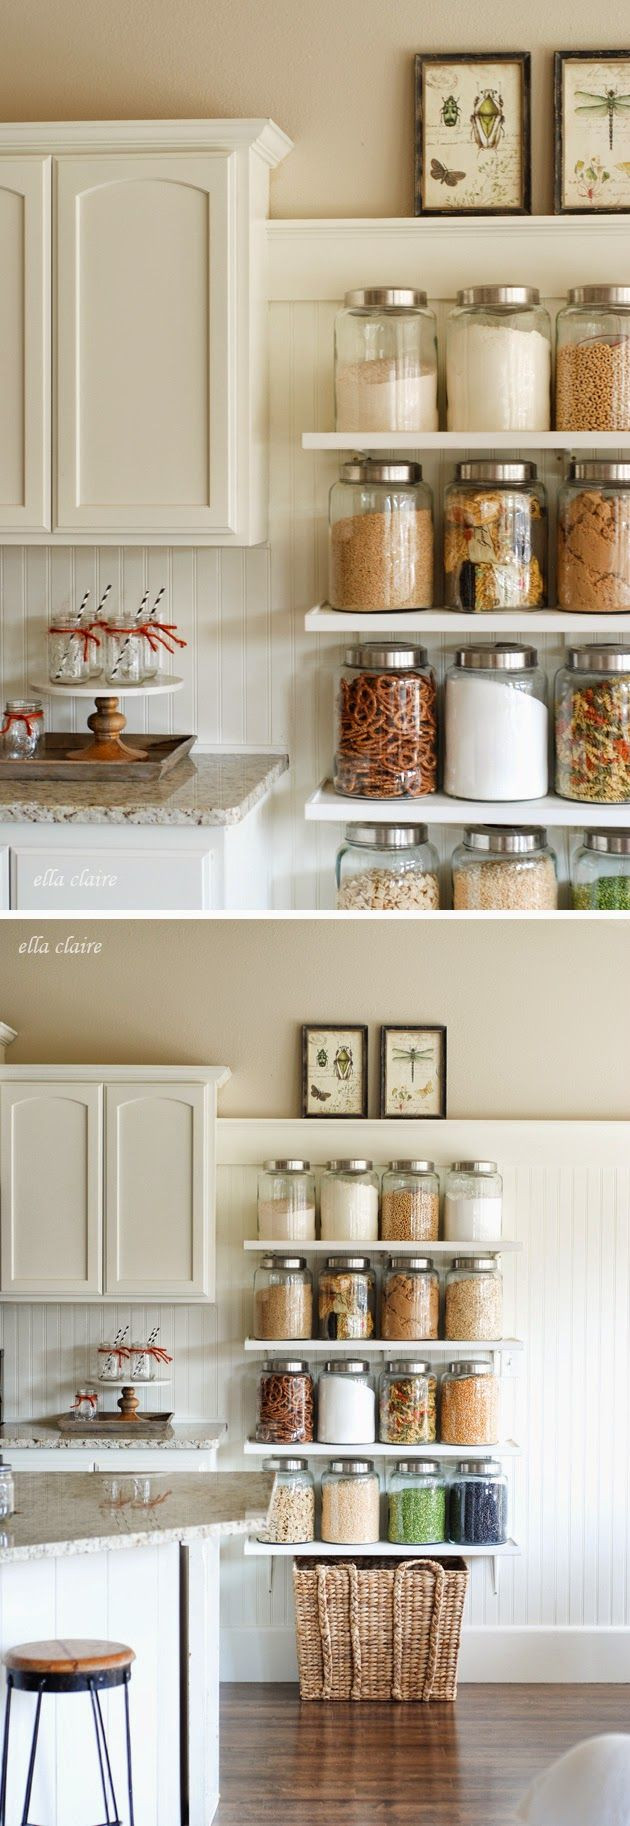 Kitchen Organizers Diy
 30 Crazily Simple DIY Tips To Improve Your Kitchen